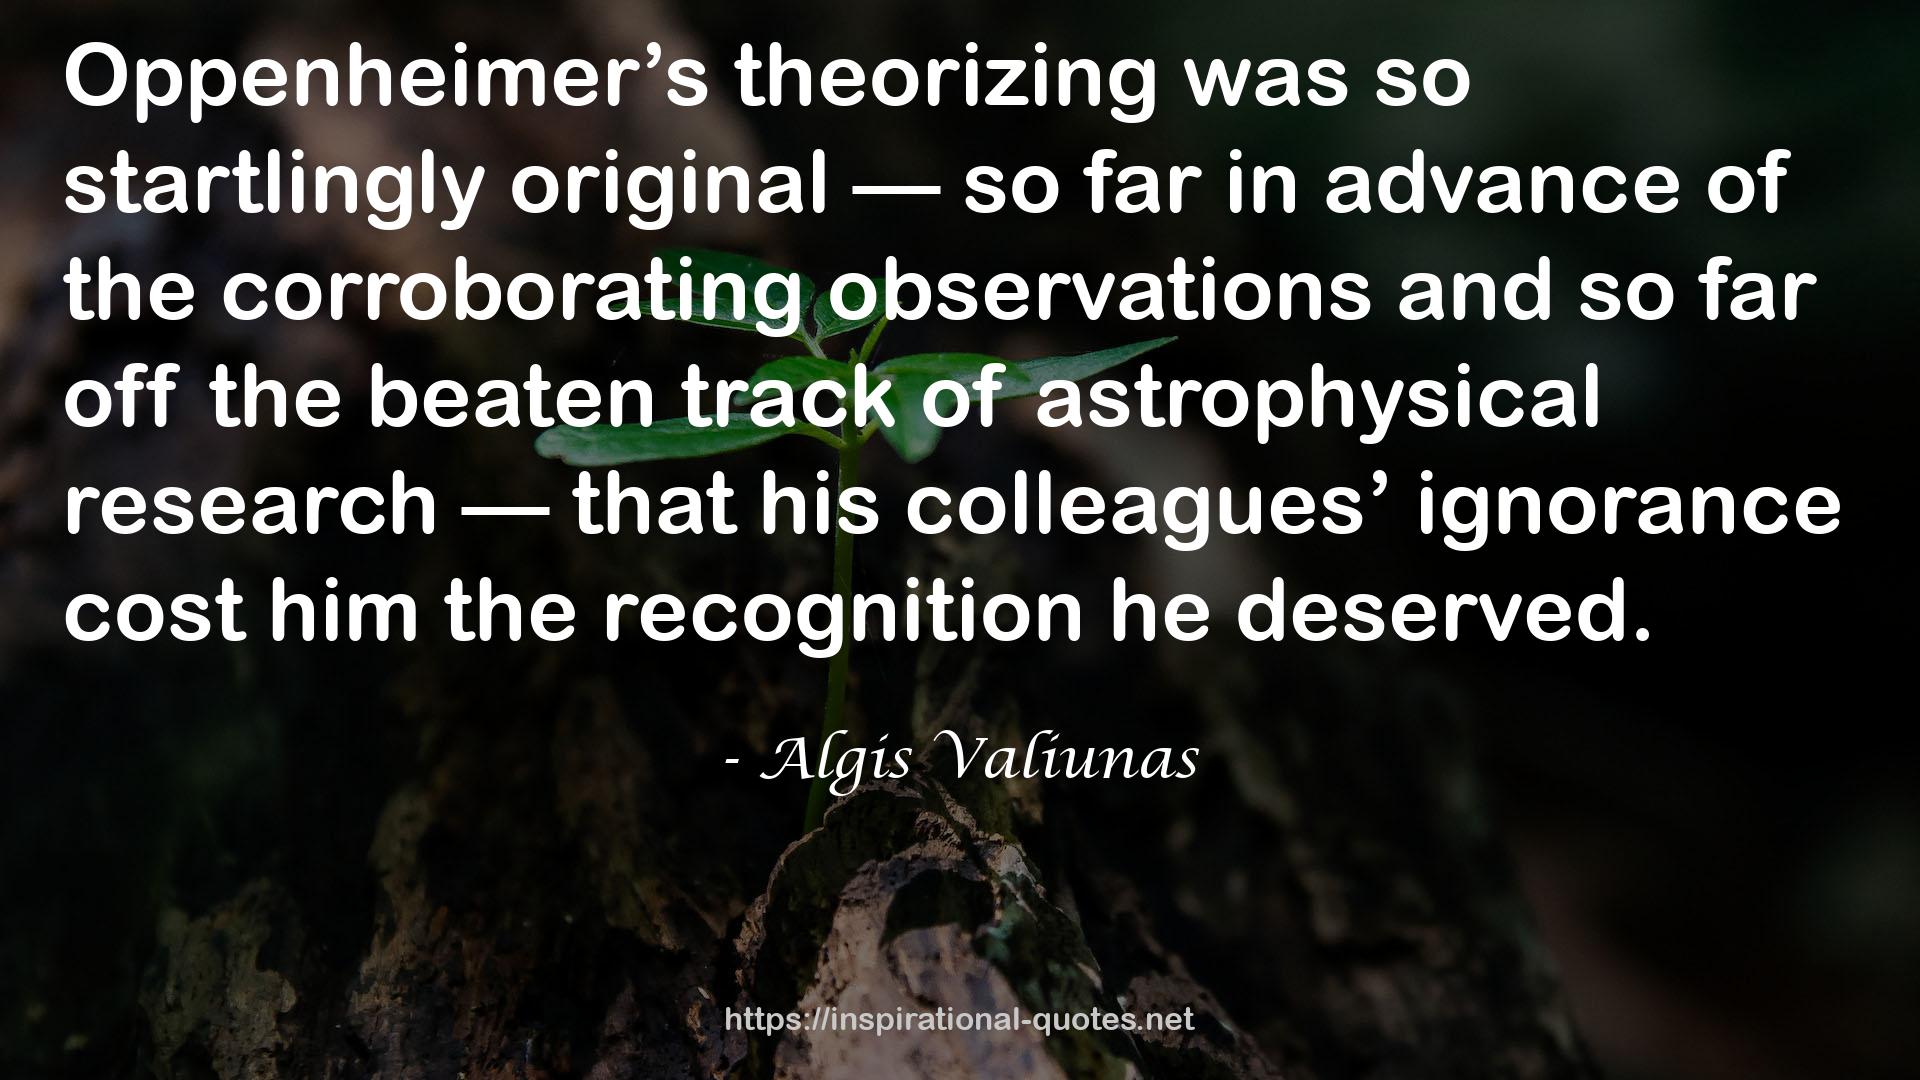 astrophysical research  QUOTES